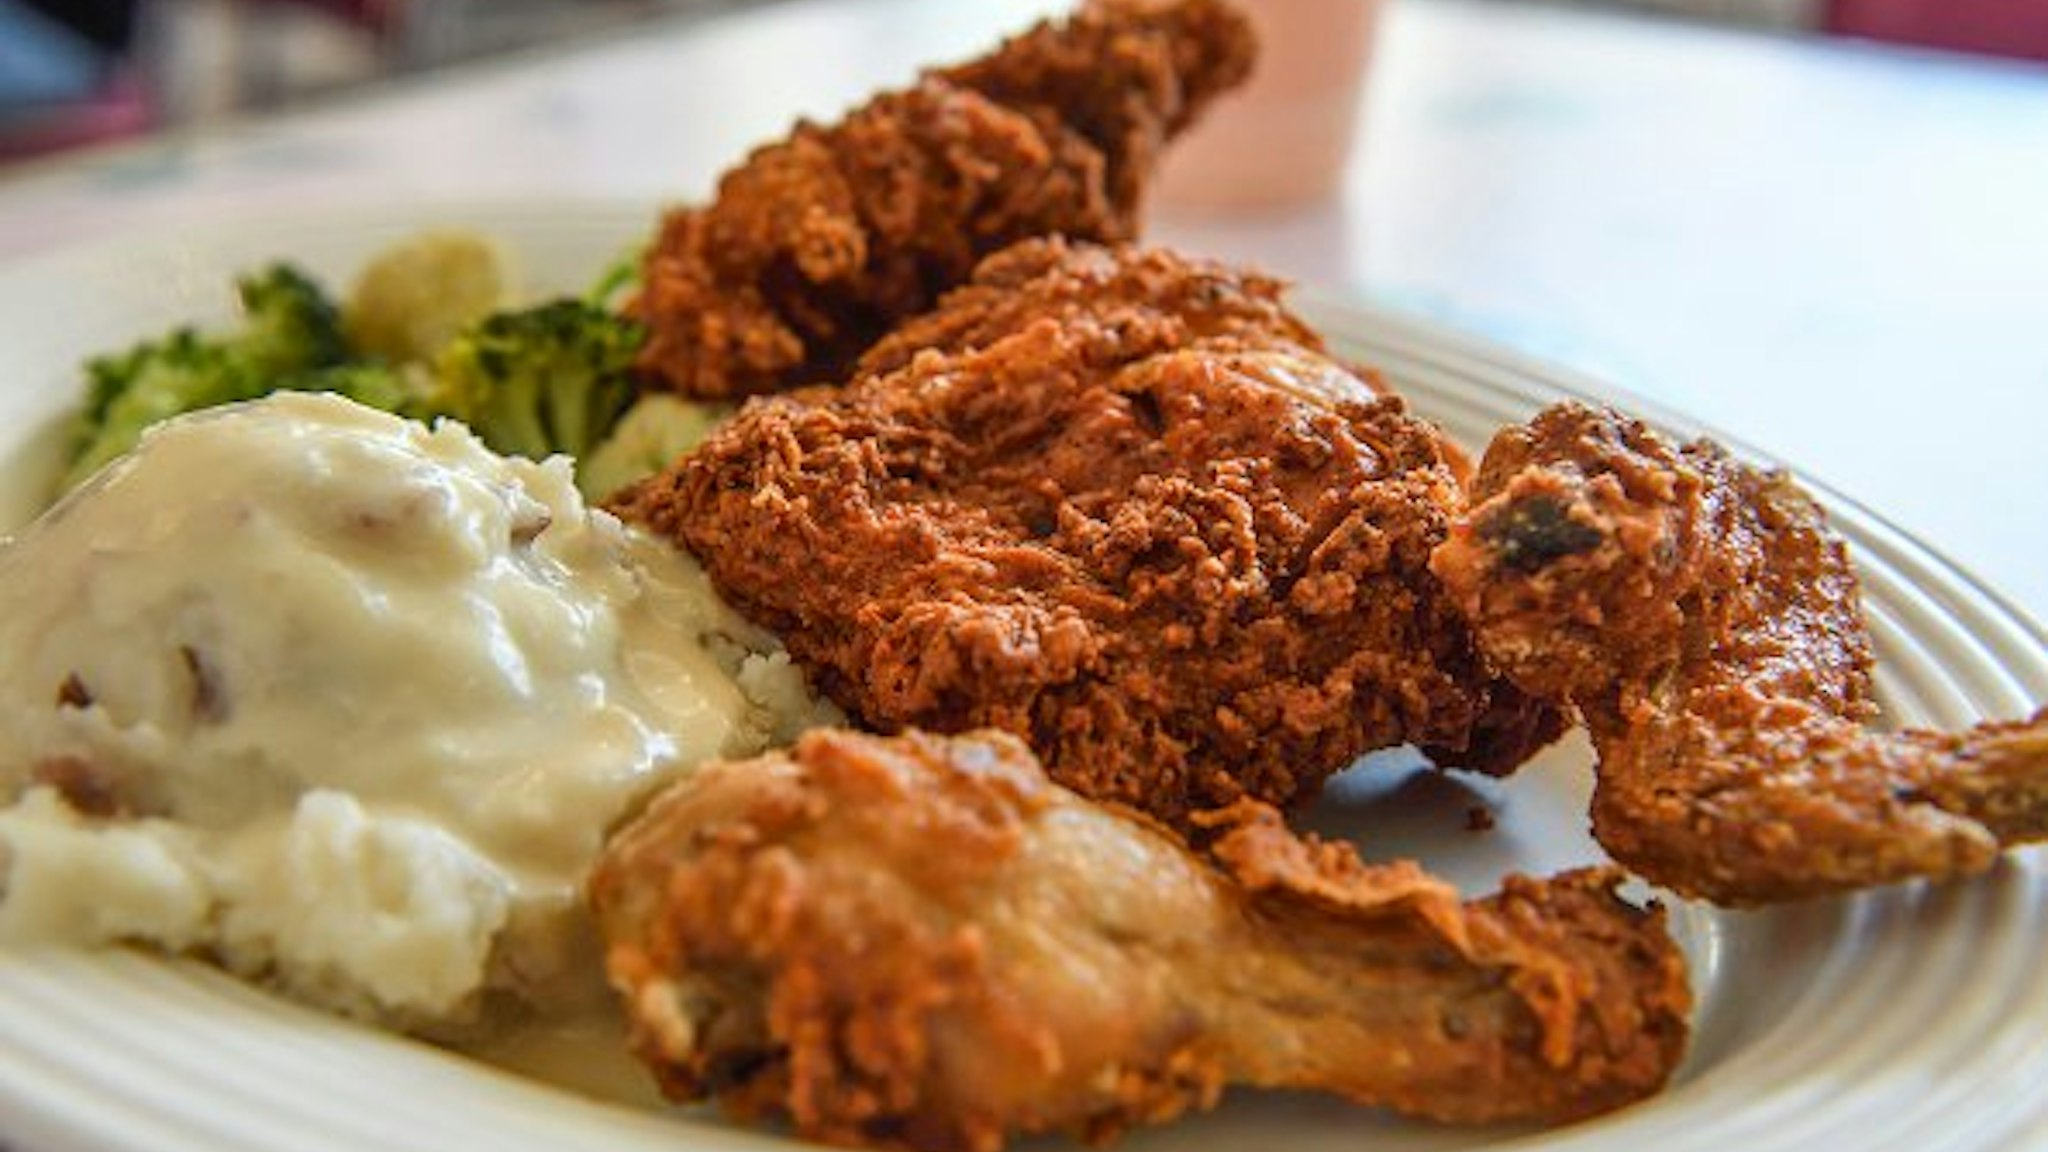 Flo's Famous Fried Chicken at Flo"u2019s V8 Caf√© in Cars Land at California Adventure in Anaheim, CA, on Thursday, July 5, 2018.